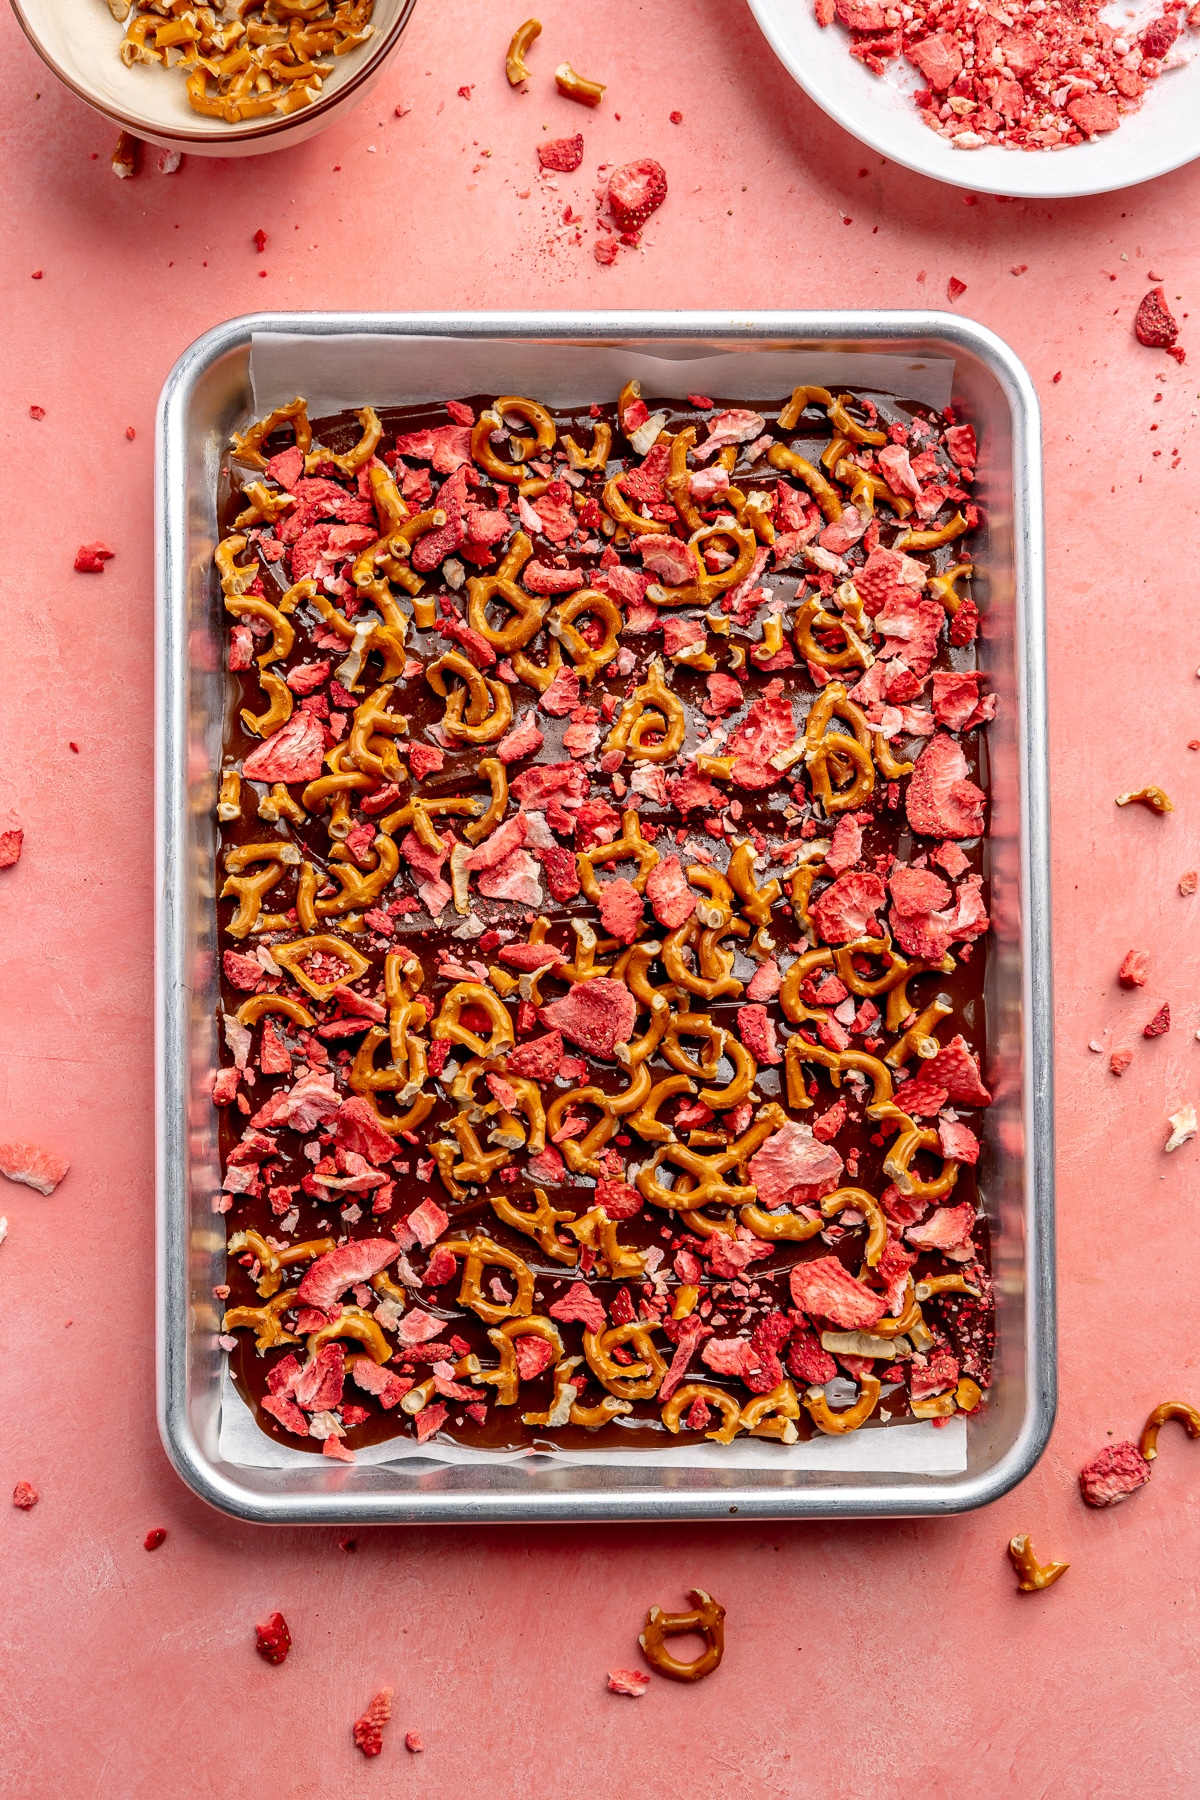 Freeze dried strawberries and broken pretzel pieces have been sprinkled over the top of the chocolate layer.